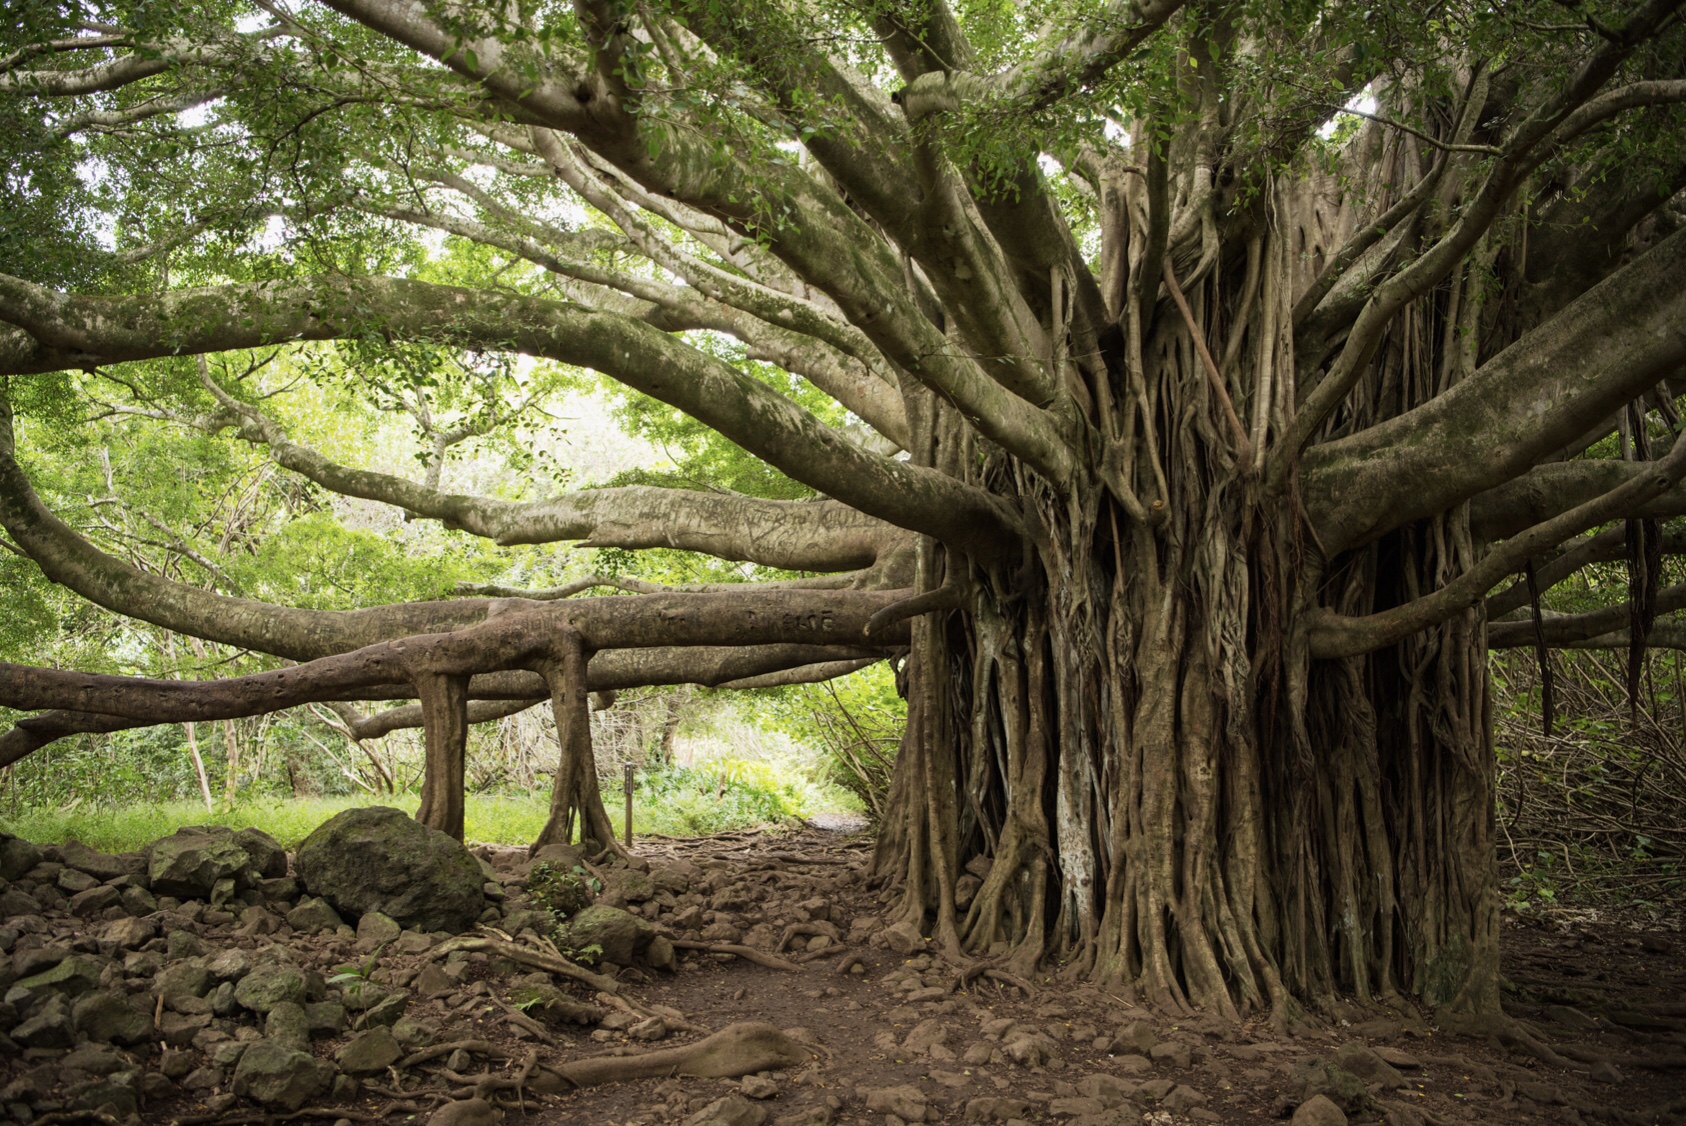 In Maui, you'll find the largest banyan tree in the United States 